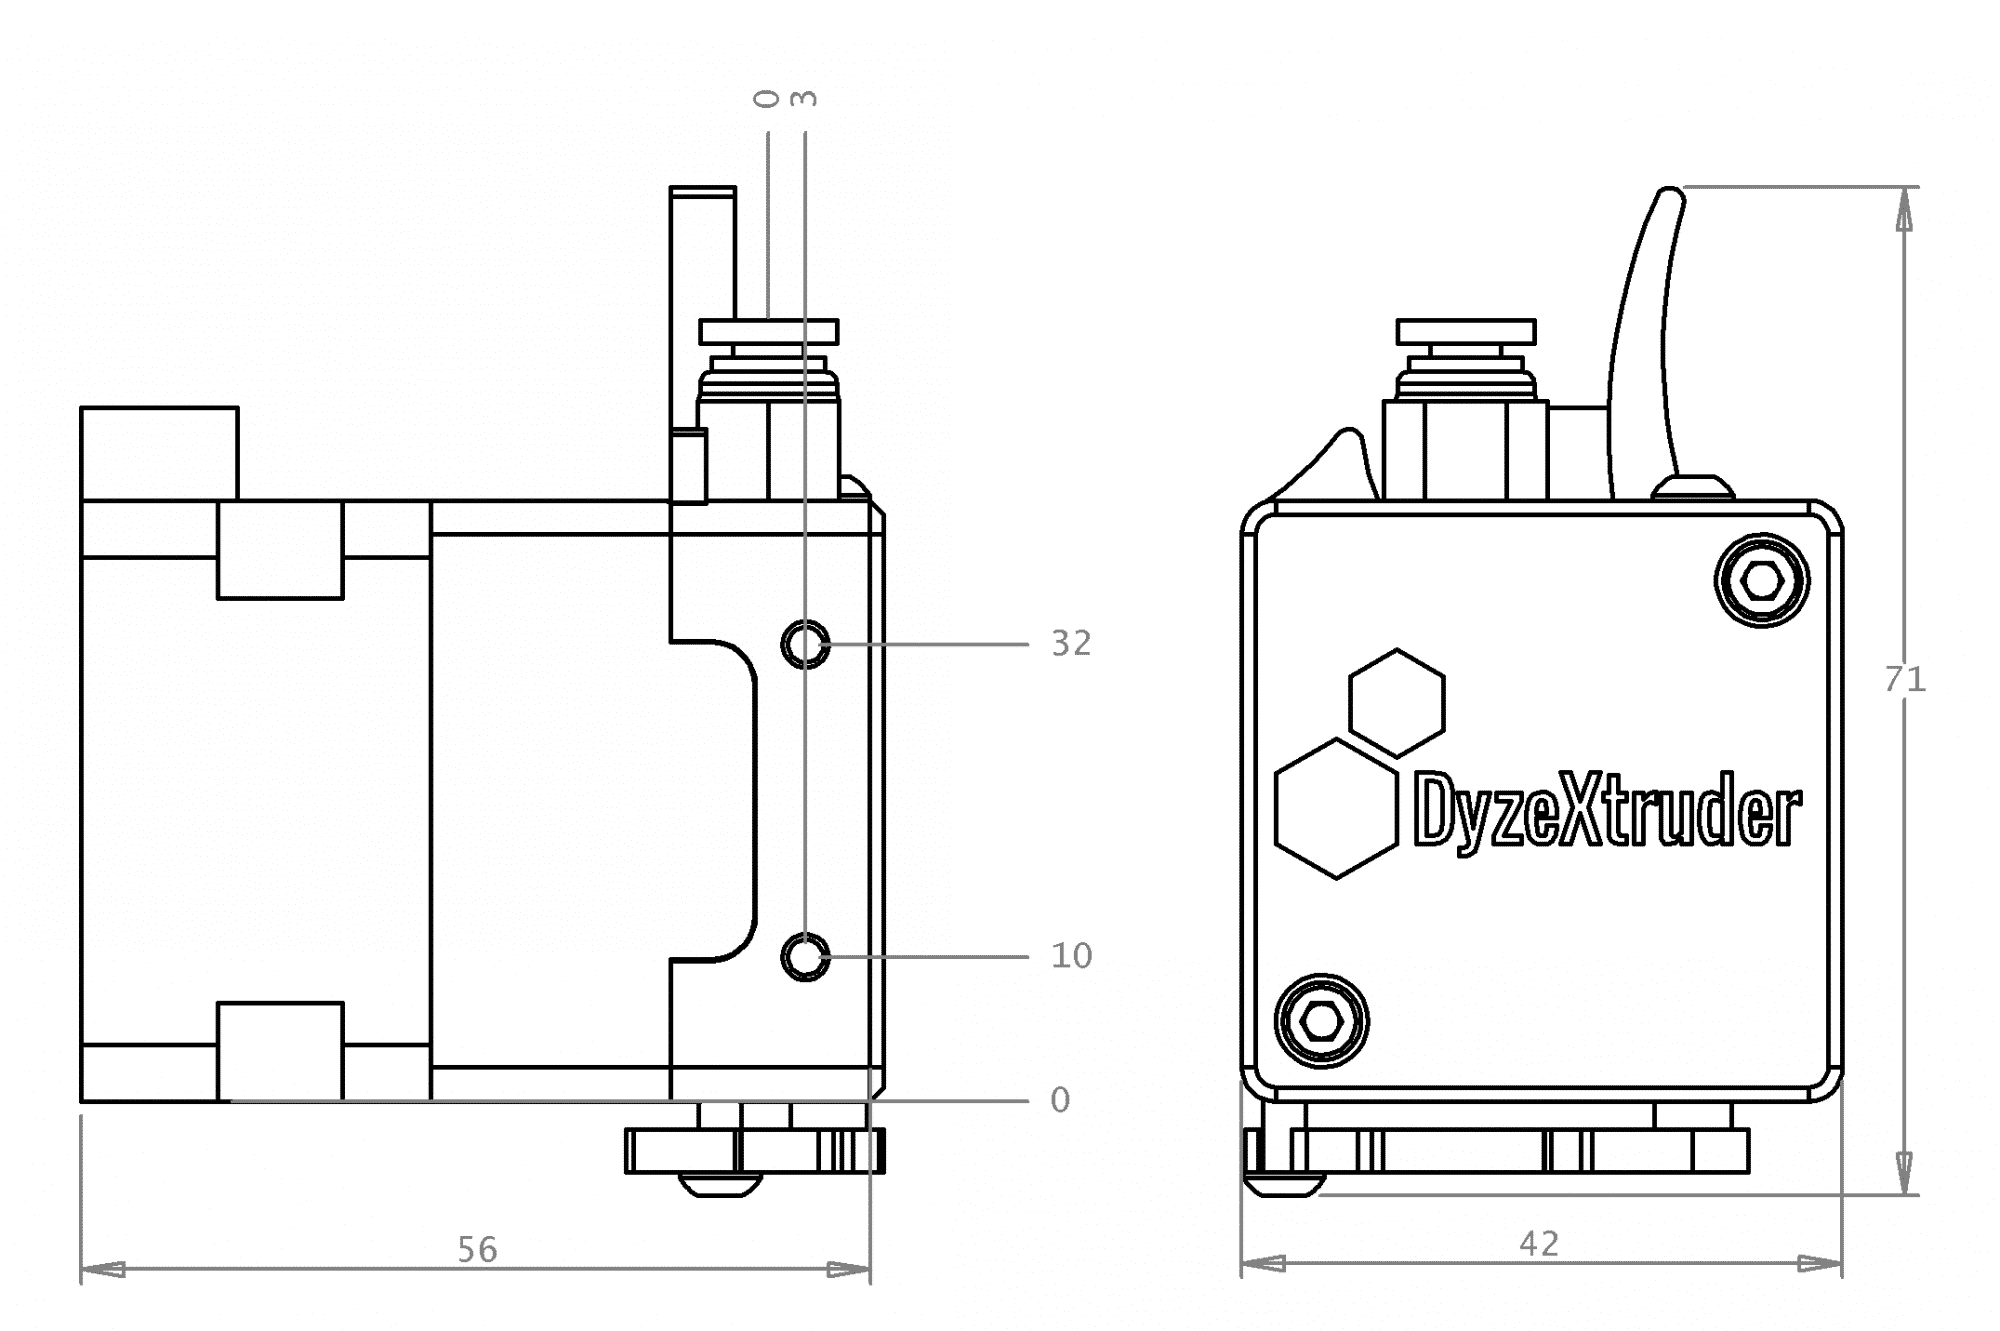 DyzeXtruder-GT Drawings